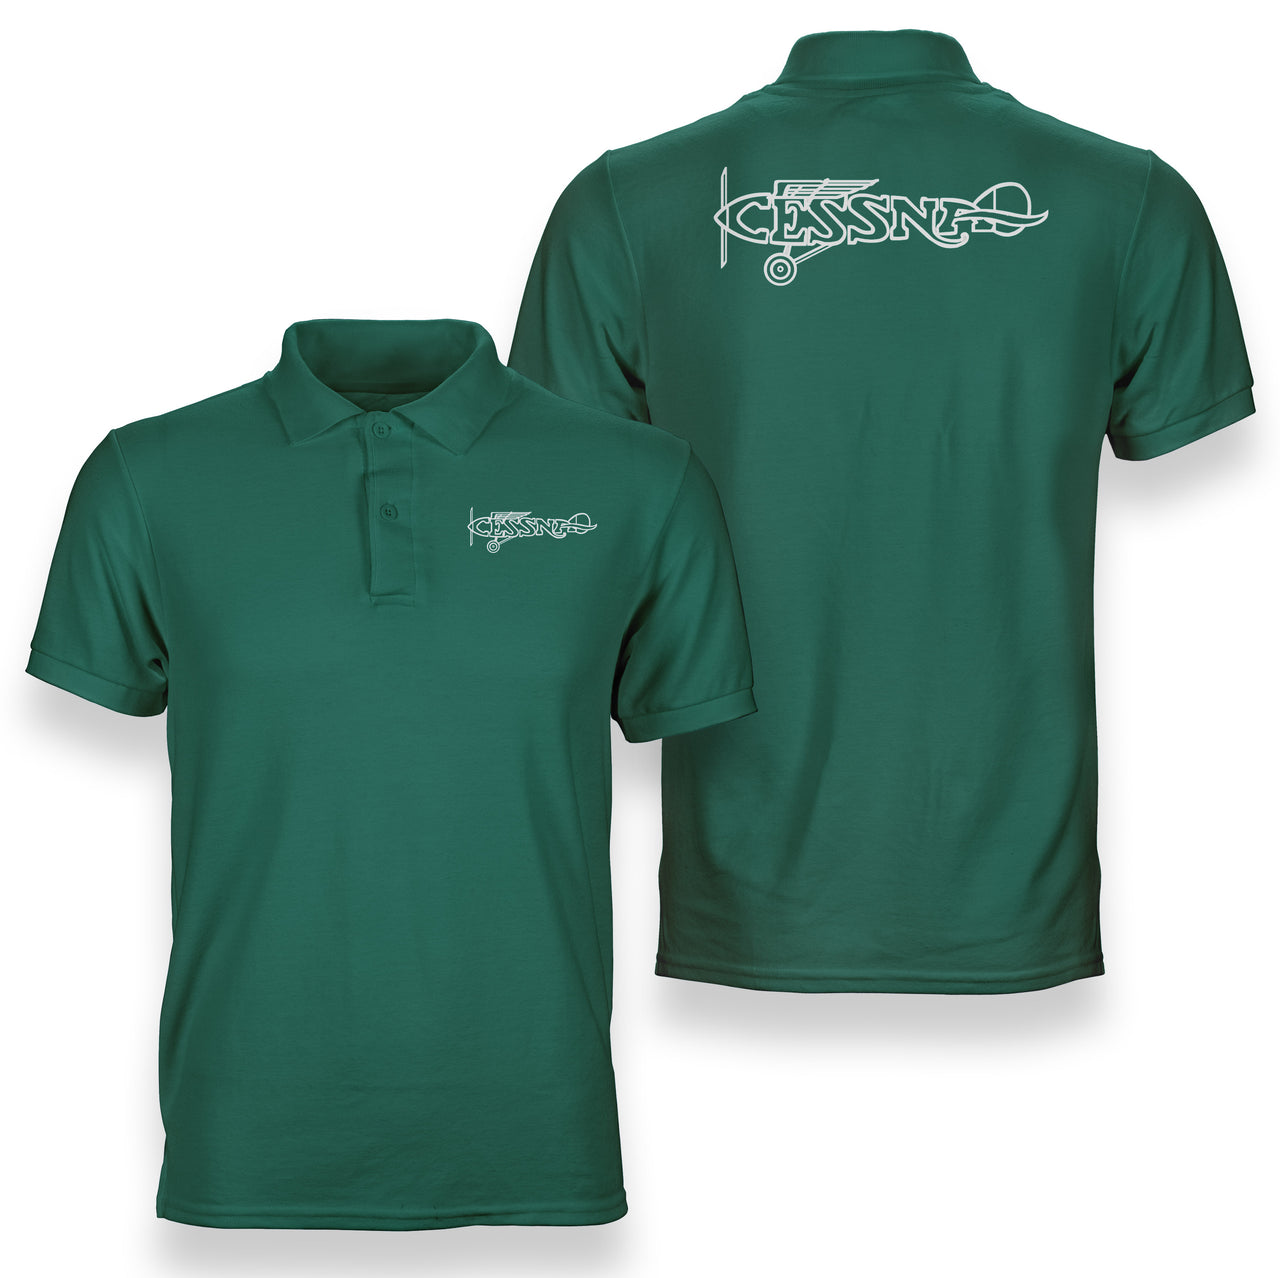 Special Cessna Text Designed Double Side Polo T-Shirts